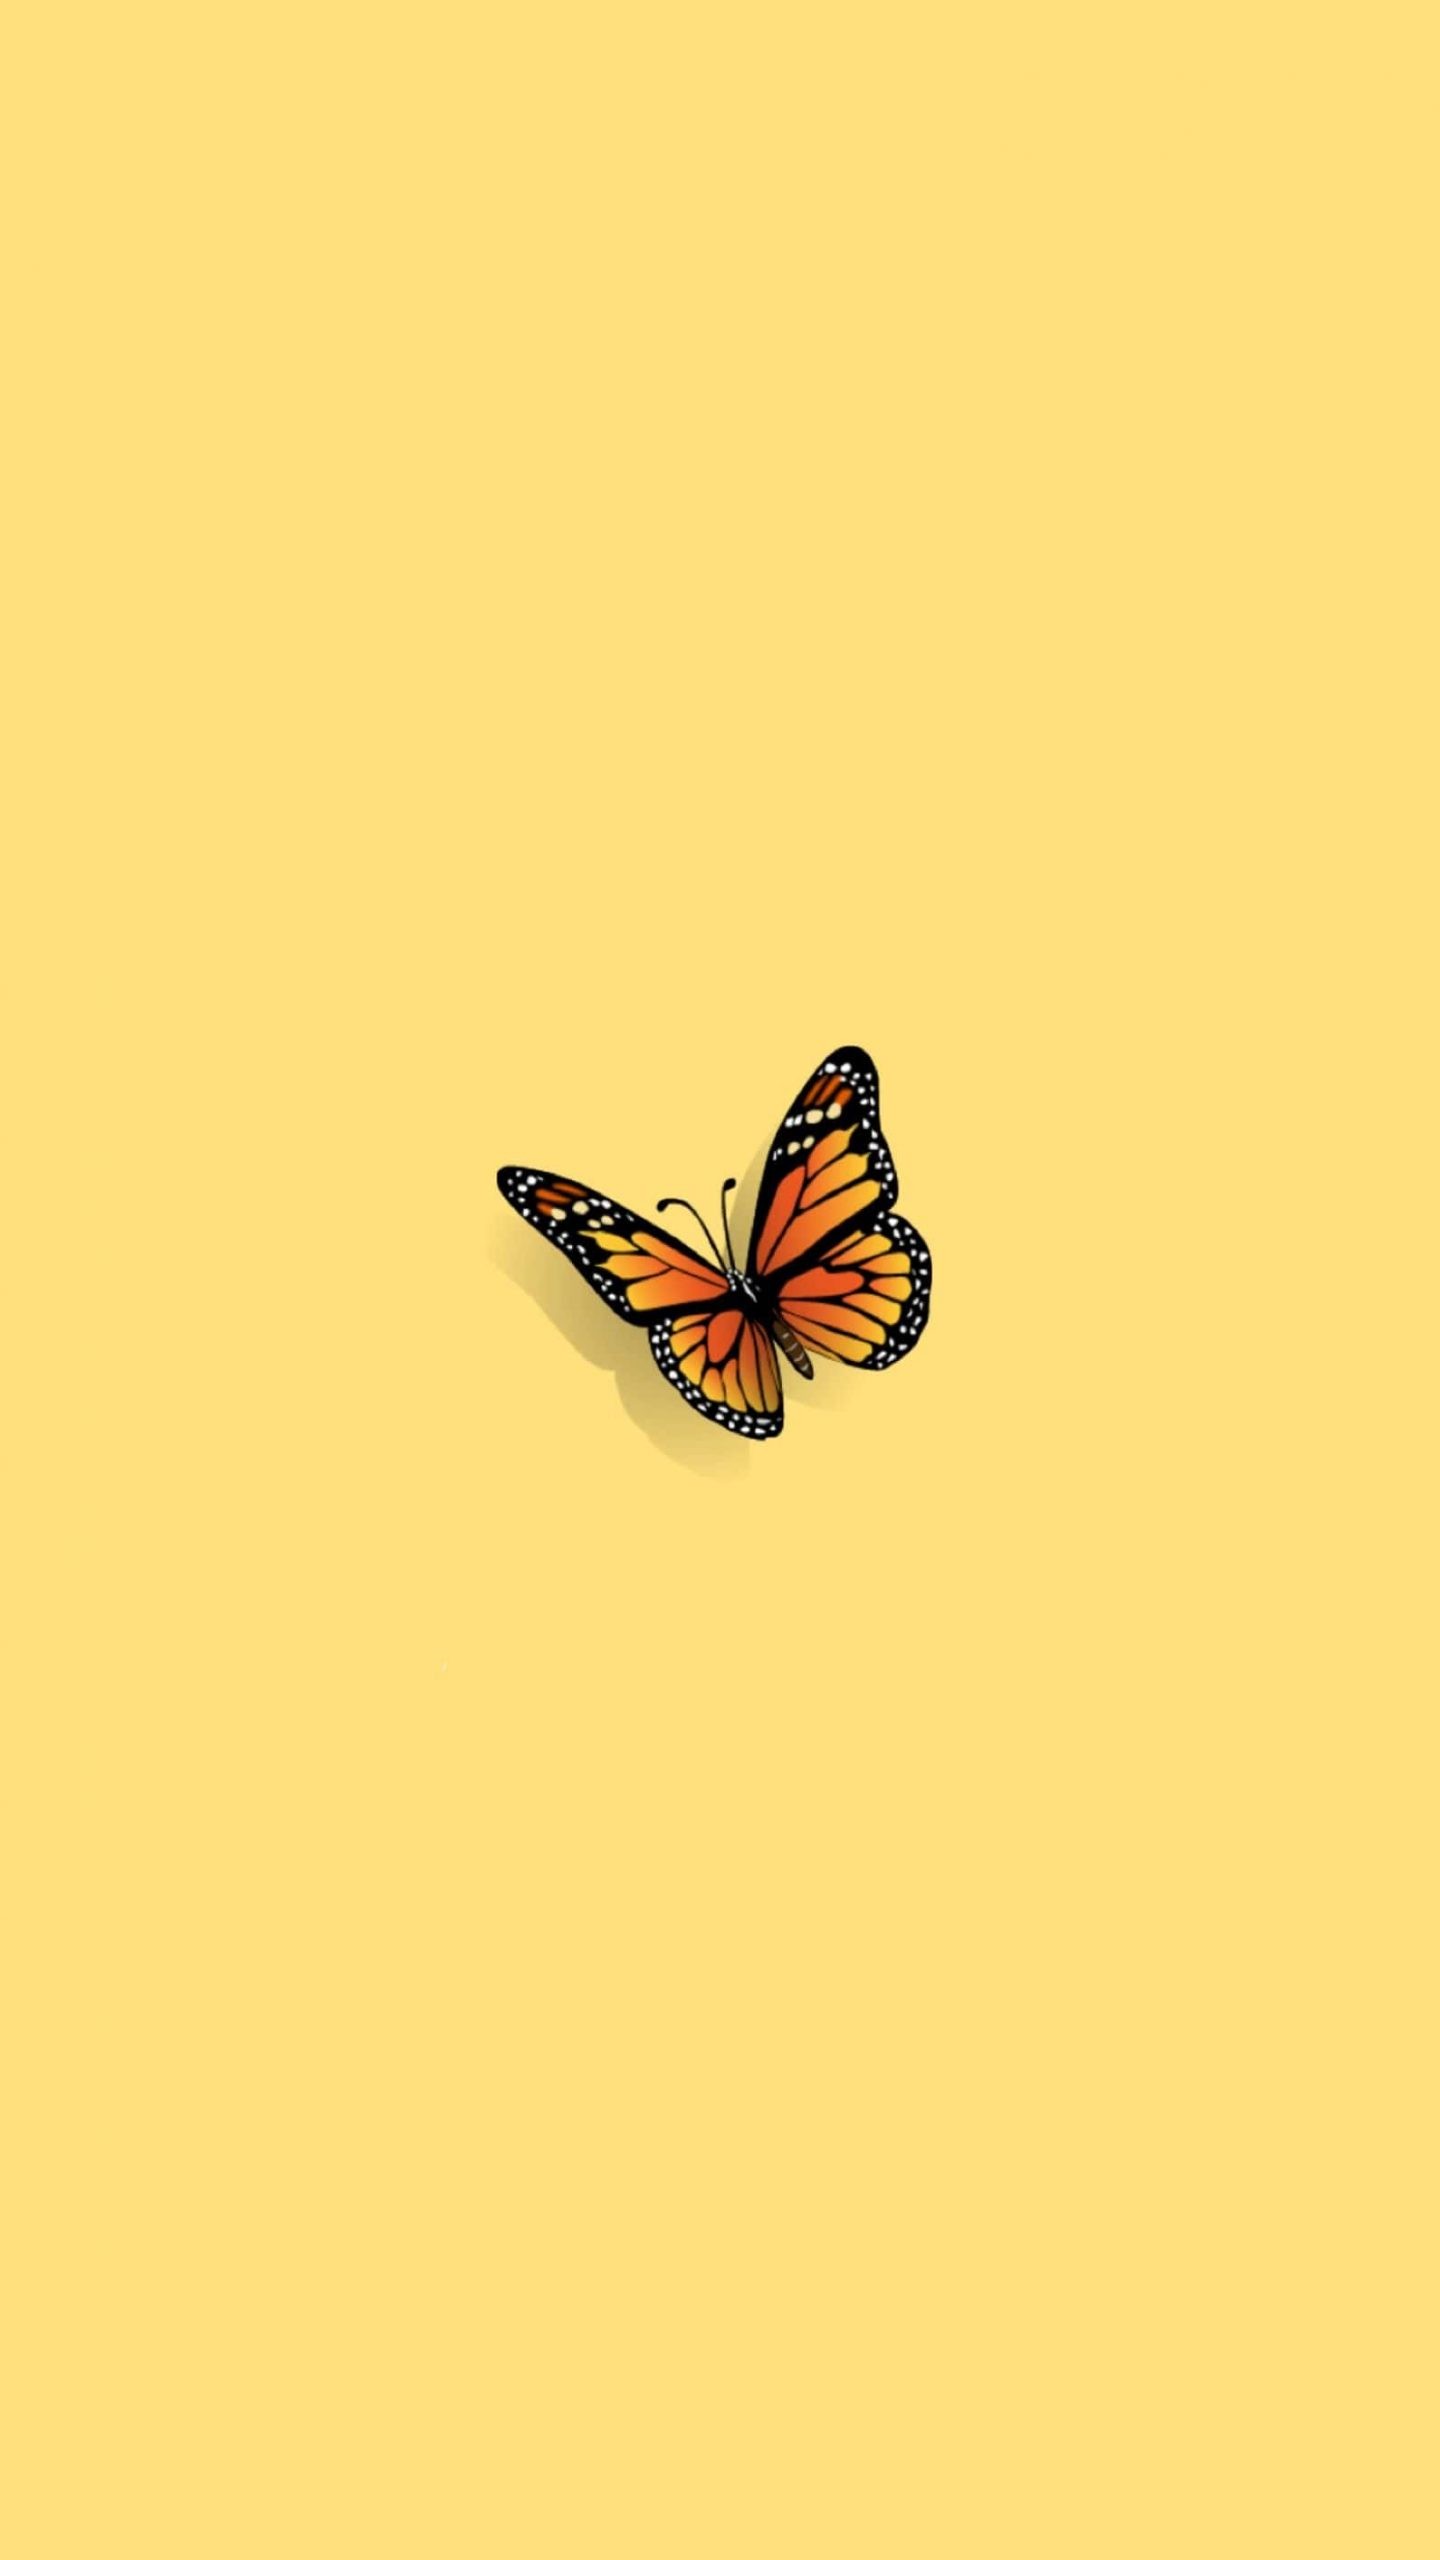 A butterfly on yellow background - Butterfly